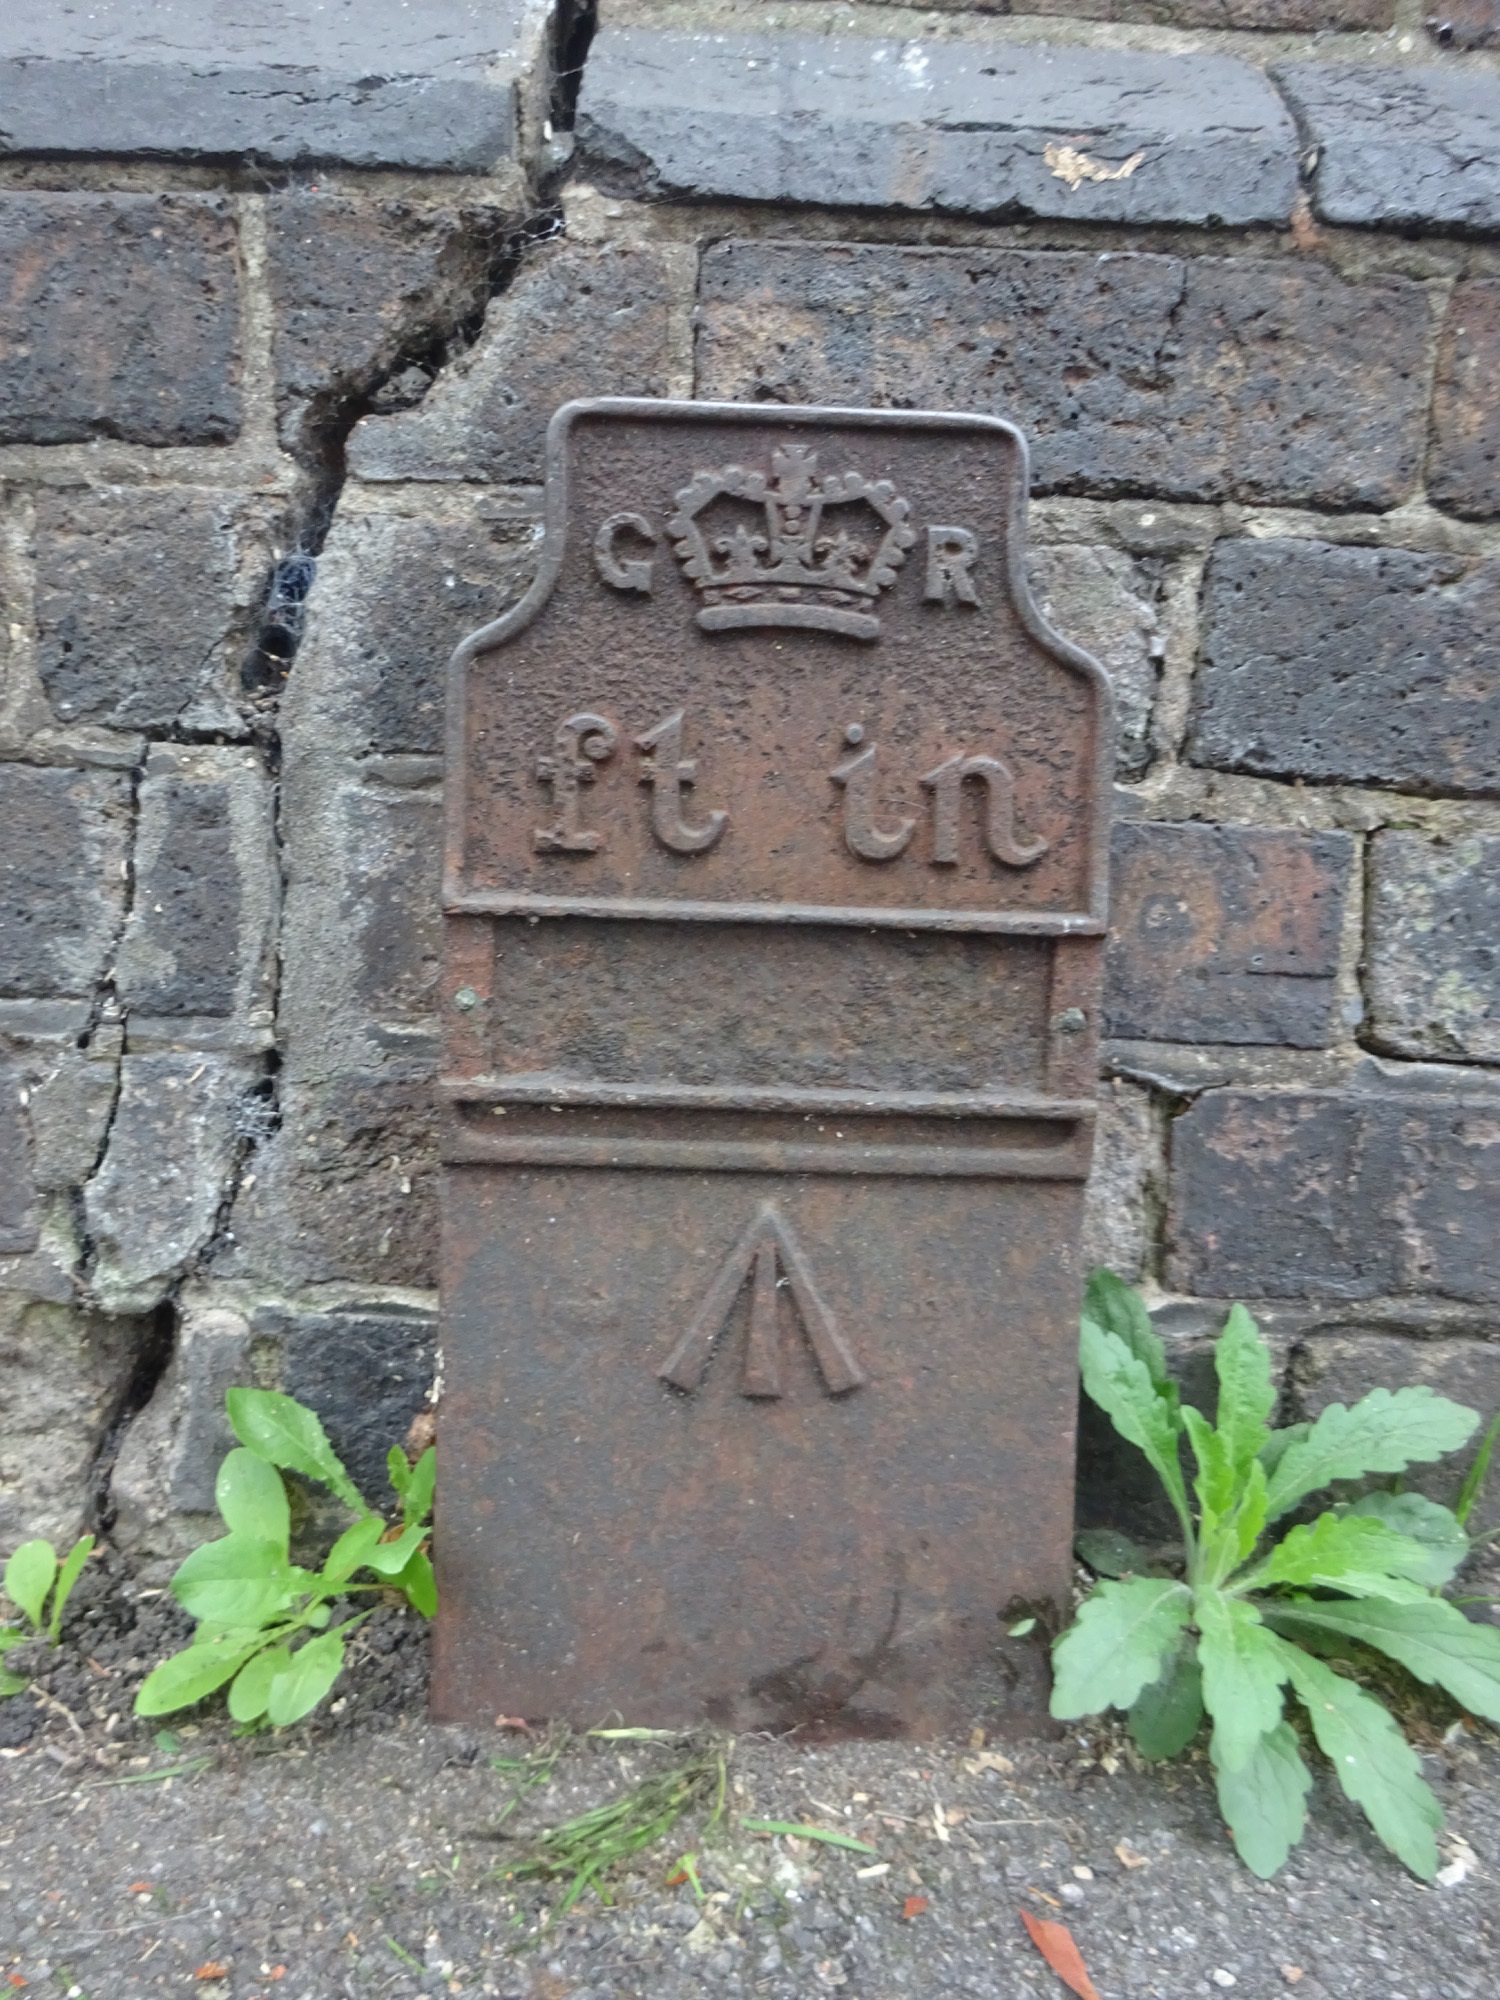 Telegraph cable marker post at Jnc Spa Road / Southgate Street (SE corner), Gloucester by MrRed 